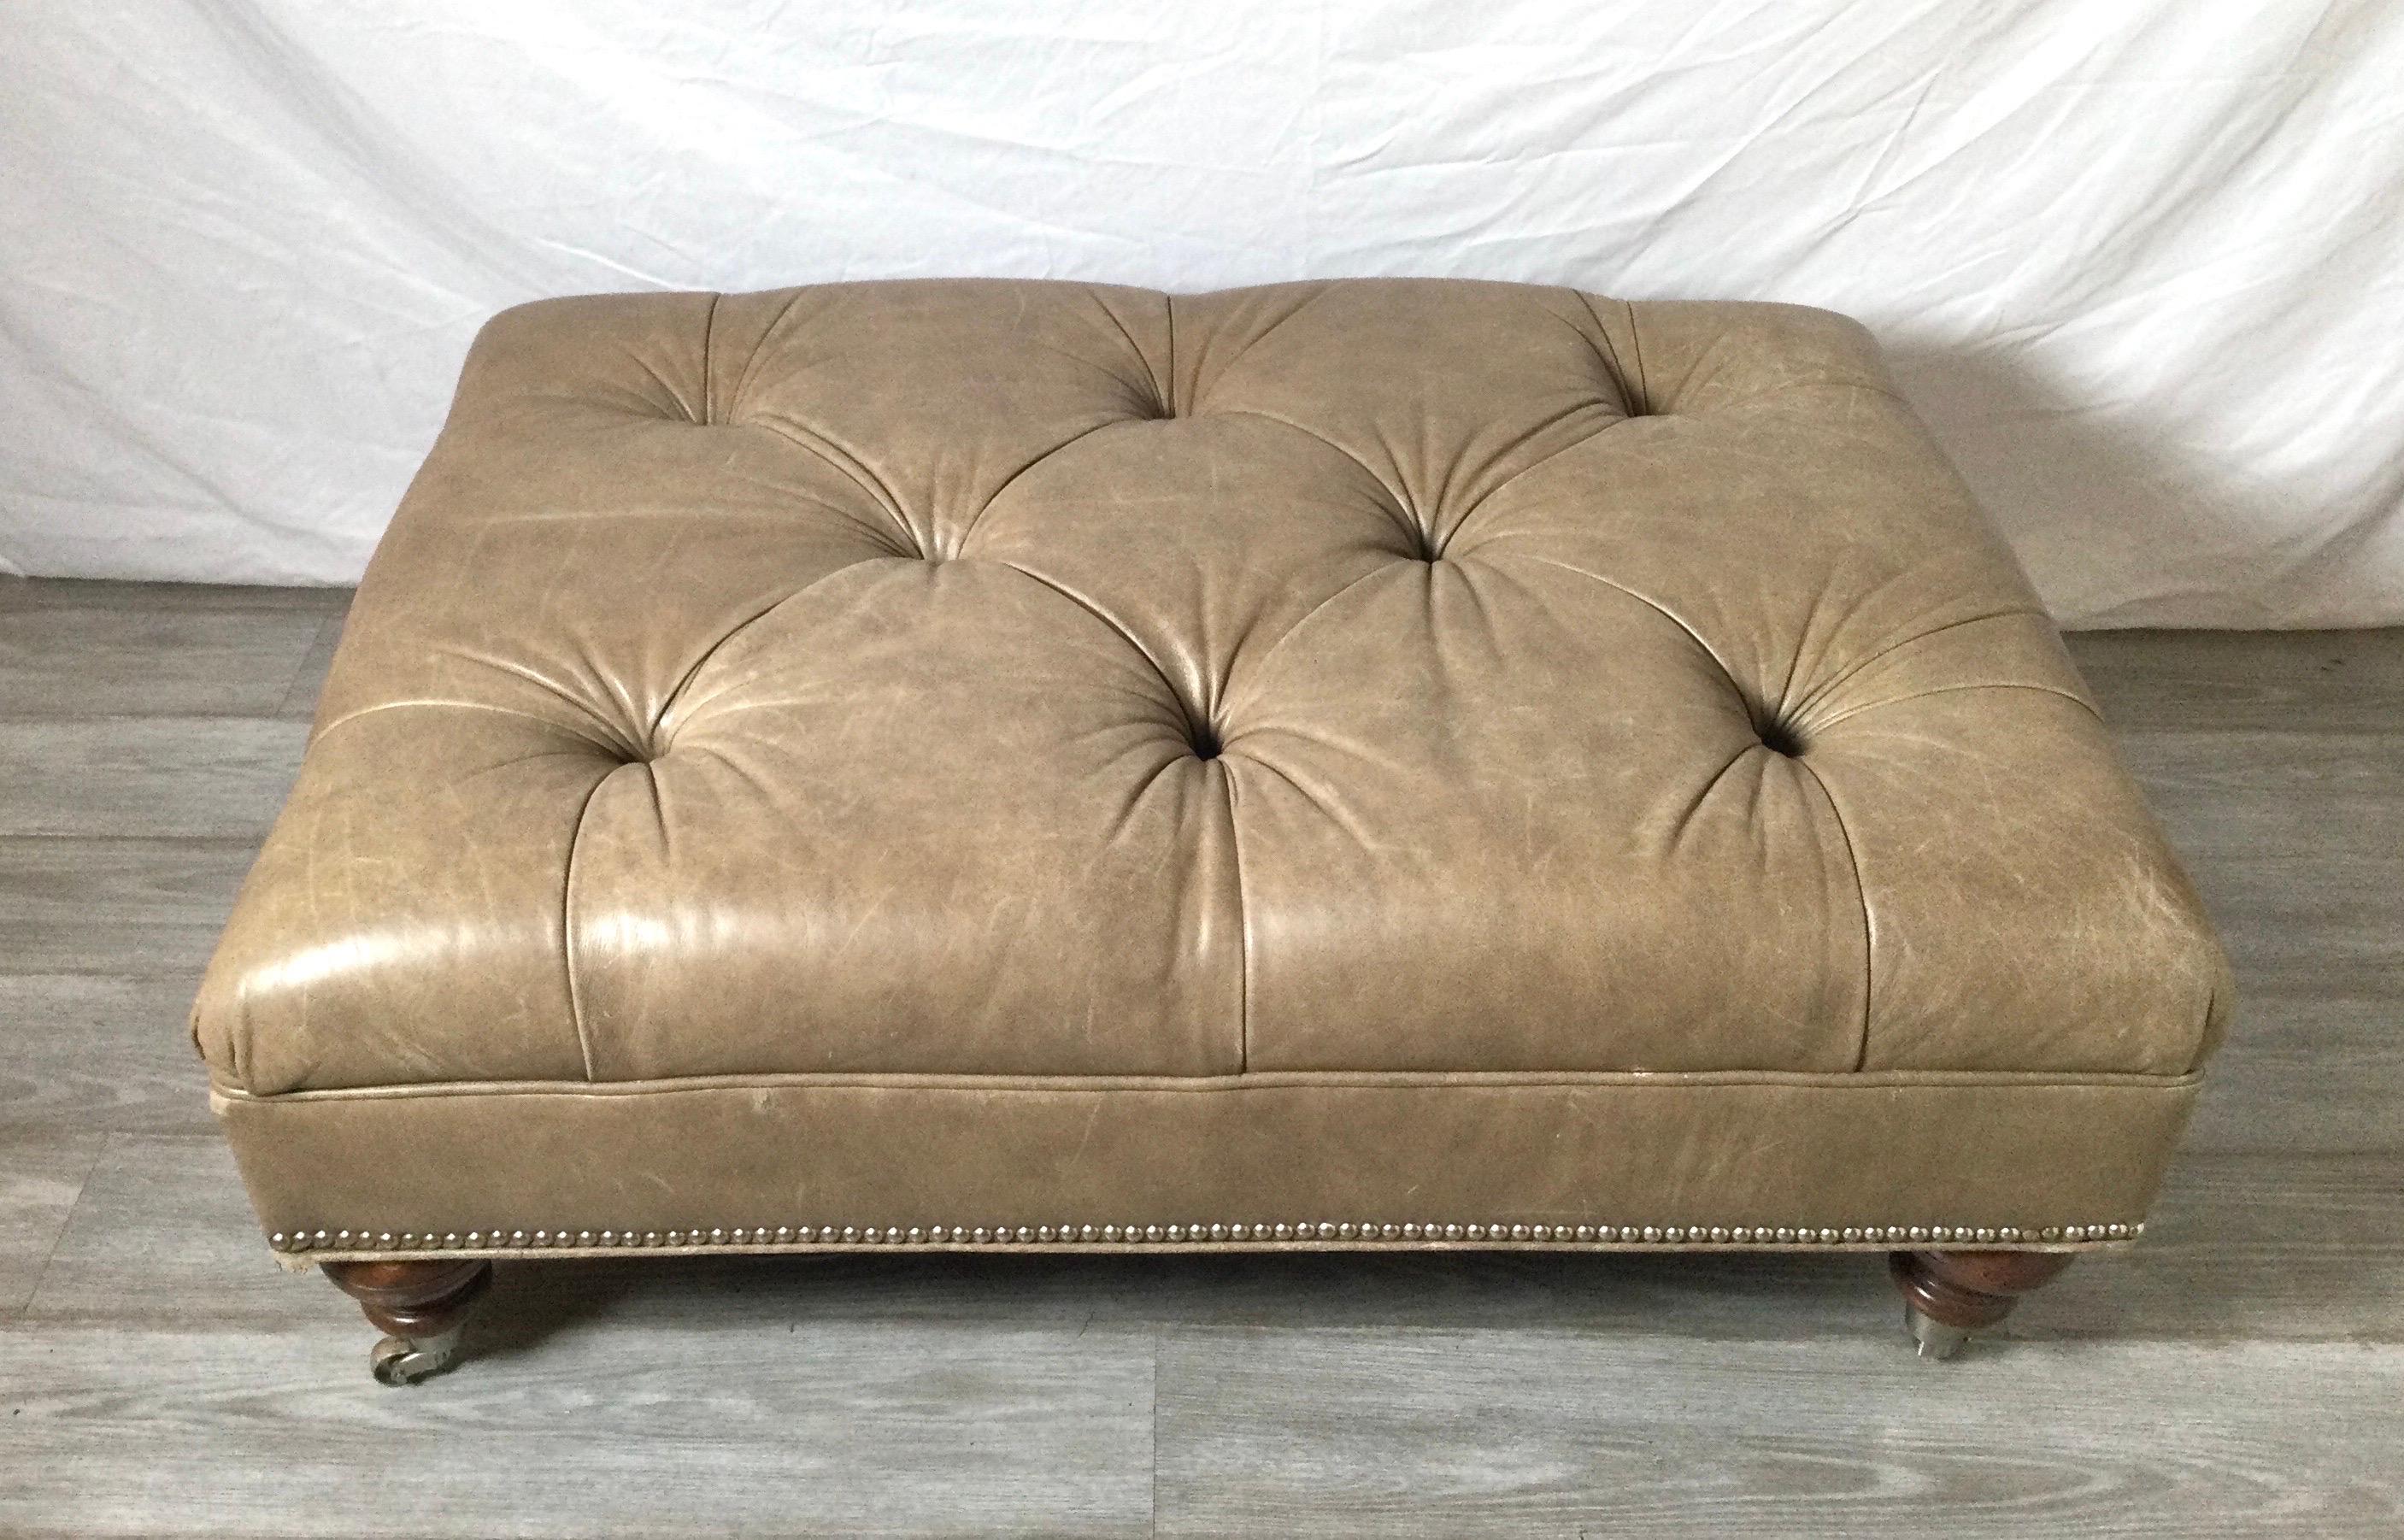 A large Taupe leather tufted ottoman on turned walnut legs with brass castors. The genuine leather with brass nail-head trim all around. The large size is perfect as an alternative to a coffee table, easy to move when needed.